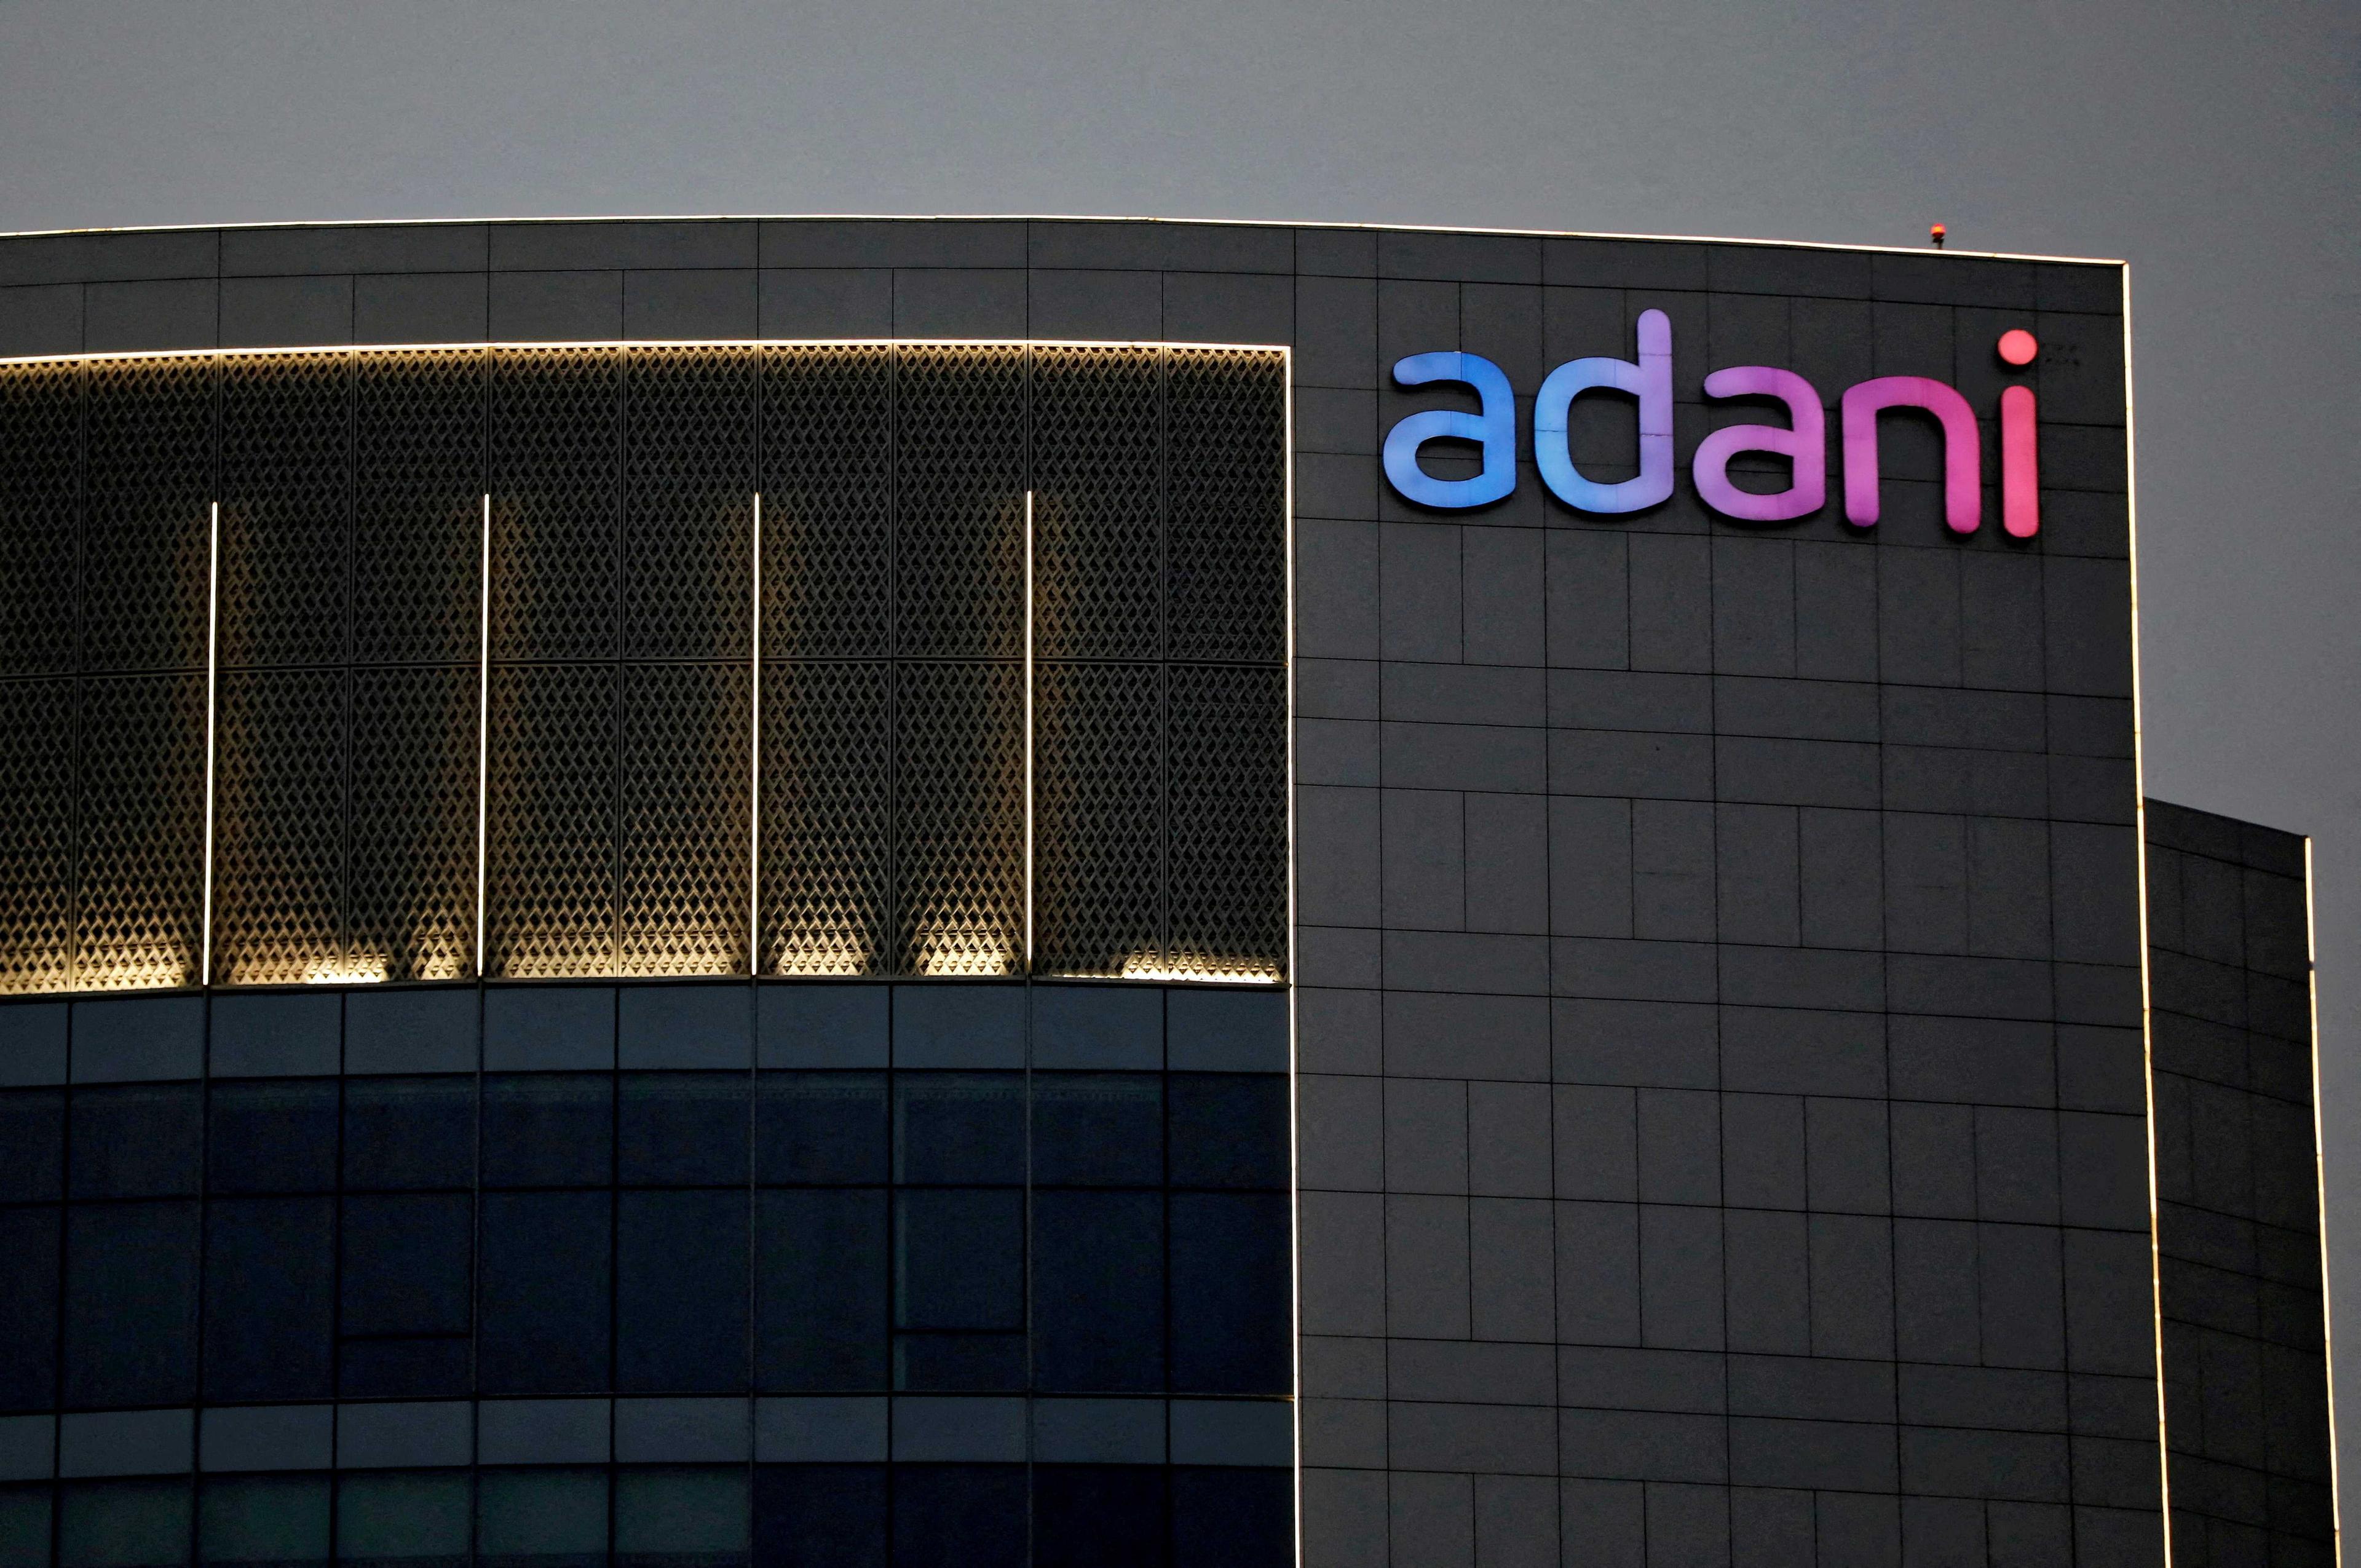 The logo of the Adani group is seen on the facade of one of its buildings on the outskirts of Ahmedabad, India, April 13, 2021. Photo: Reuters